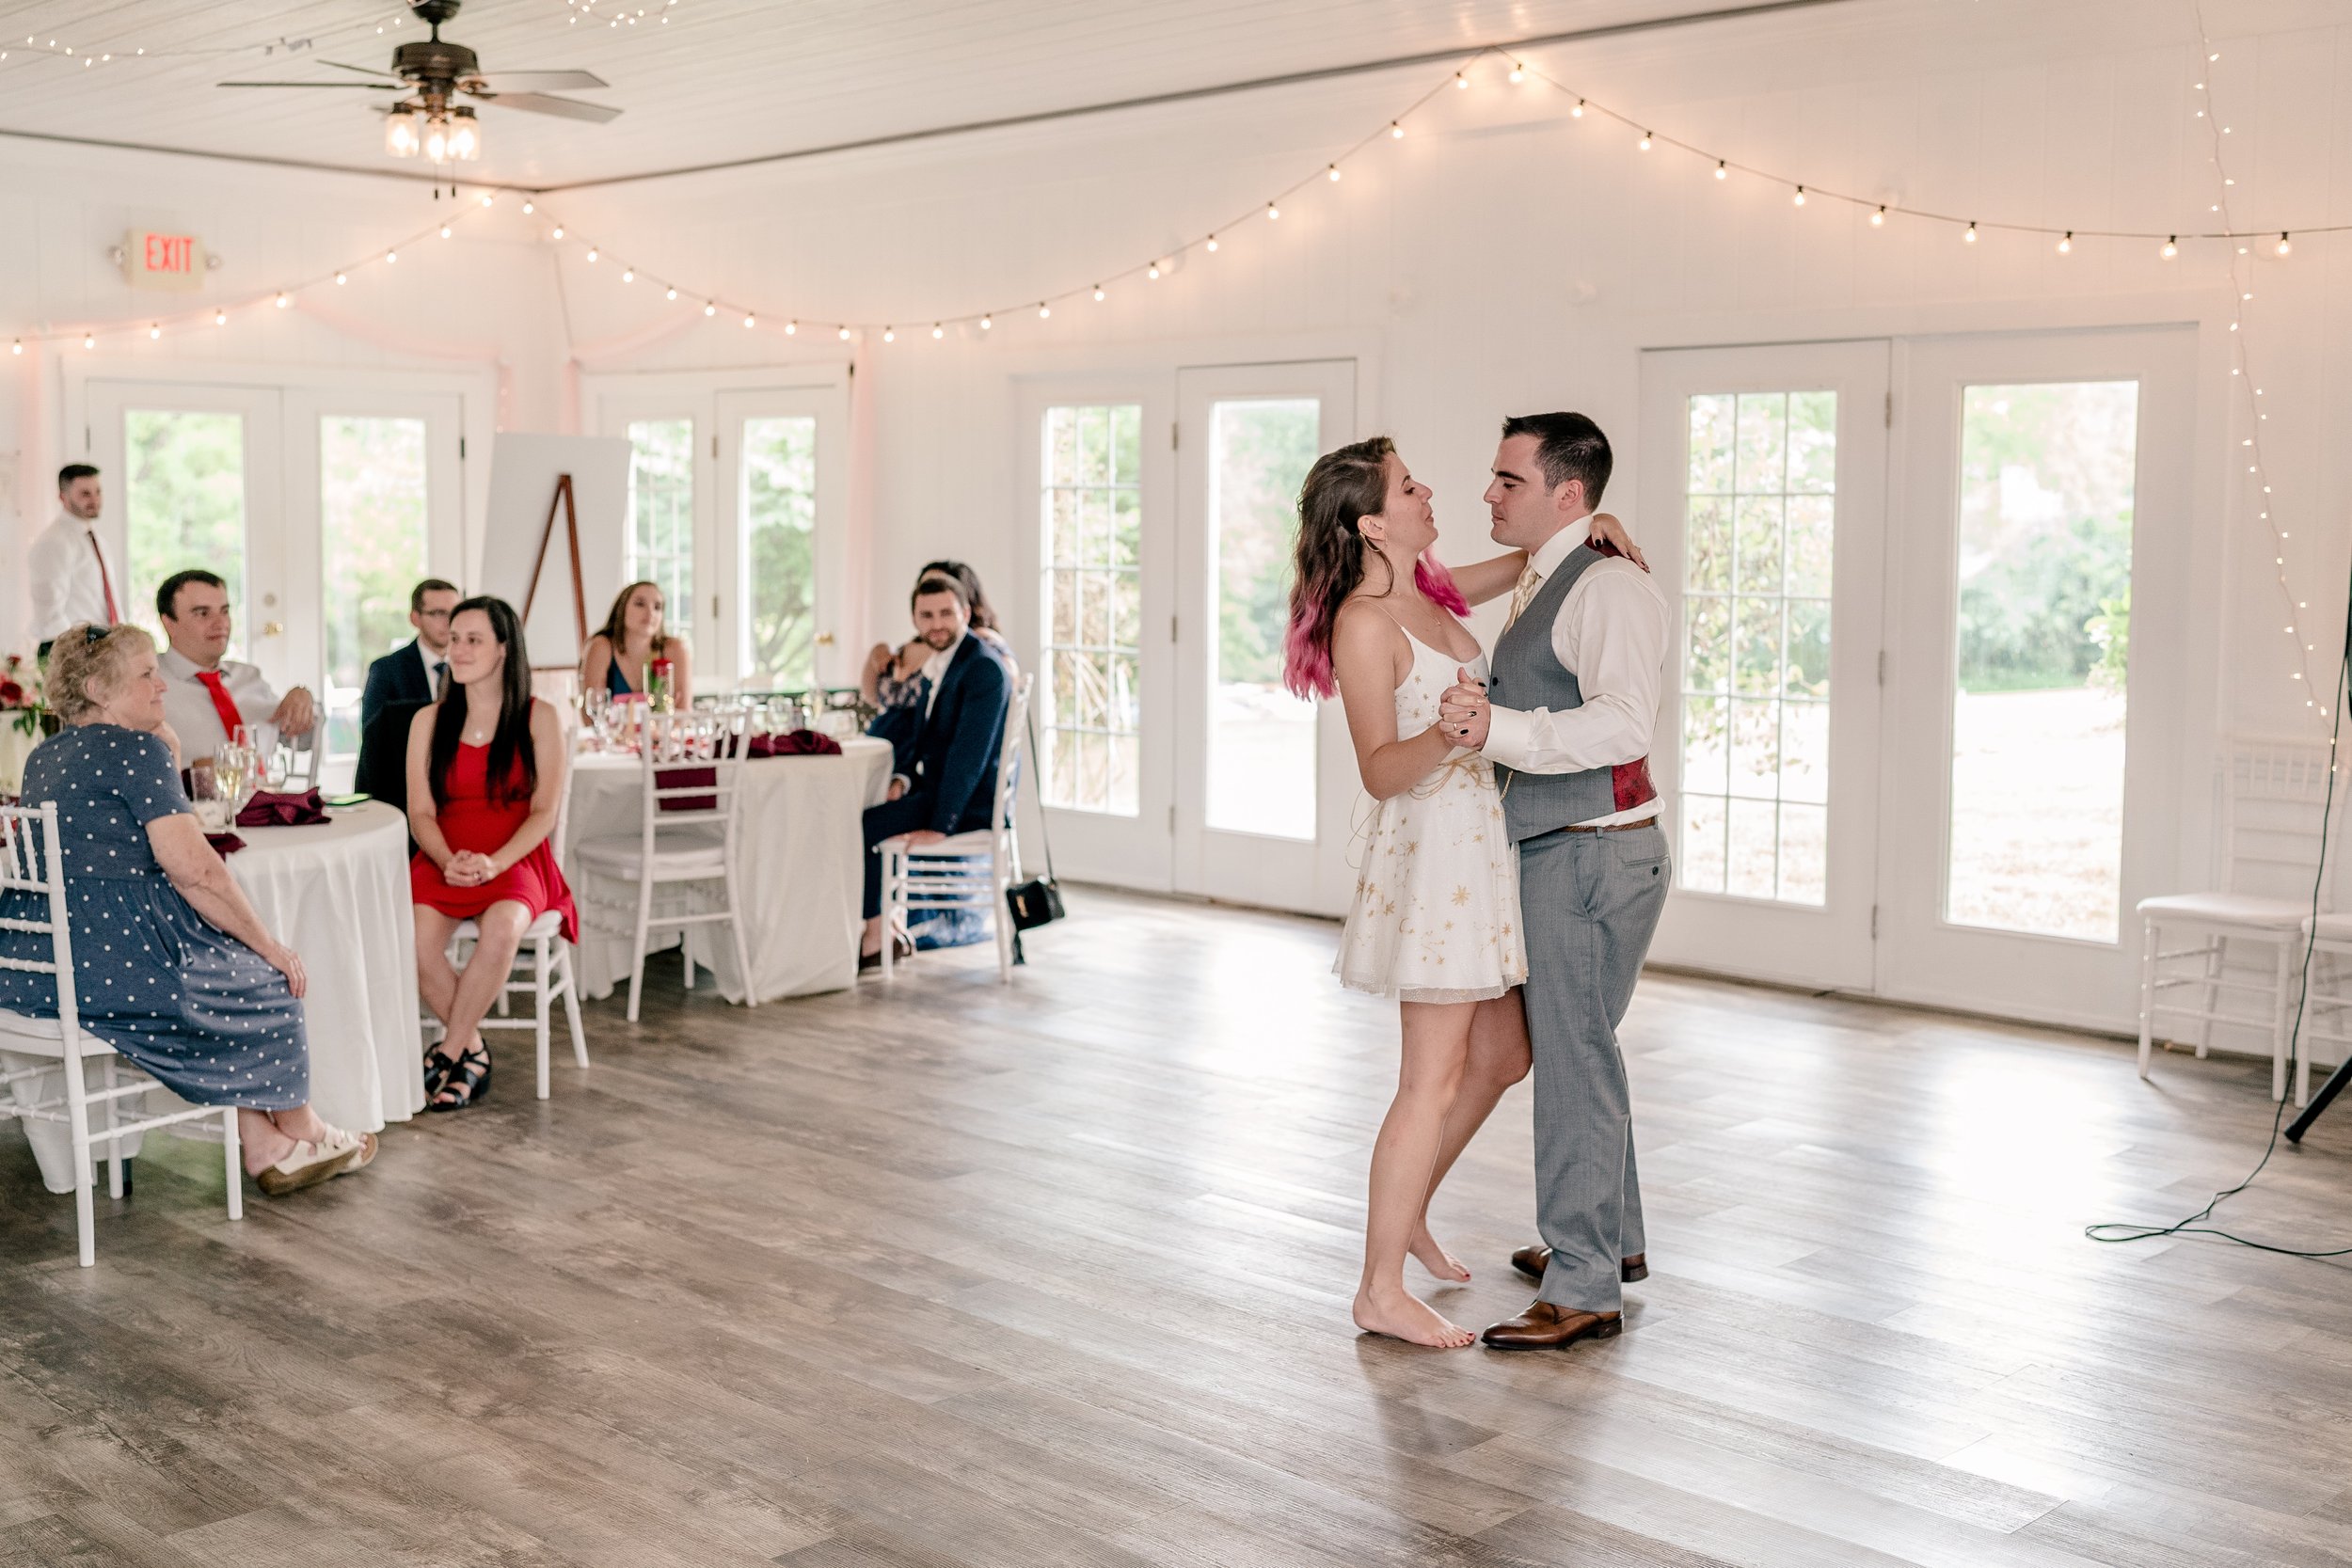 A bride and groom share their first dance during a wedding at one of the best wedding venues in Northern Virginia